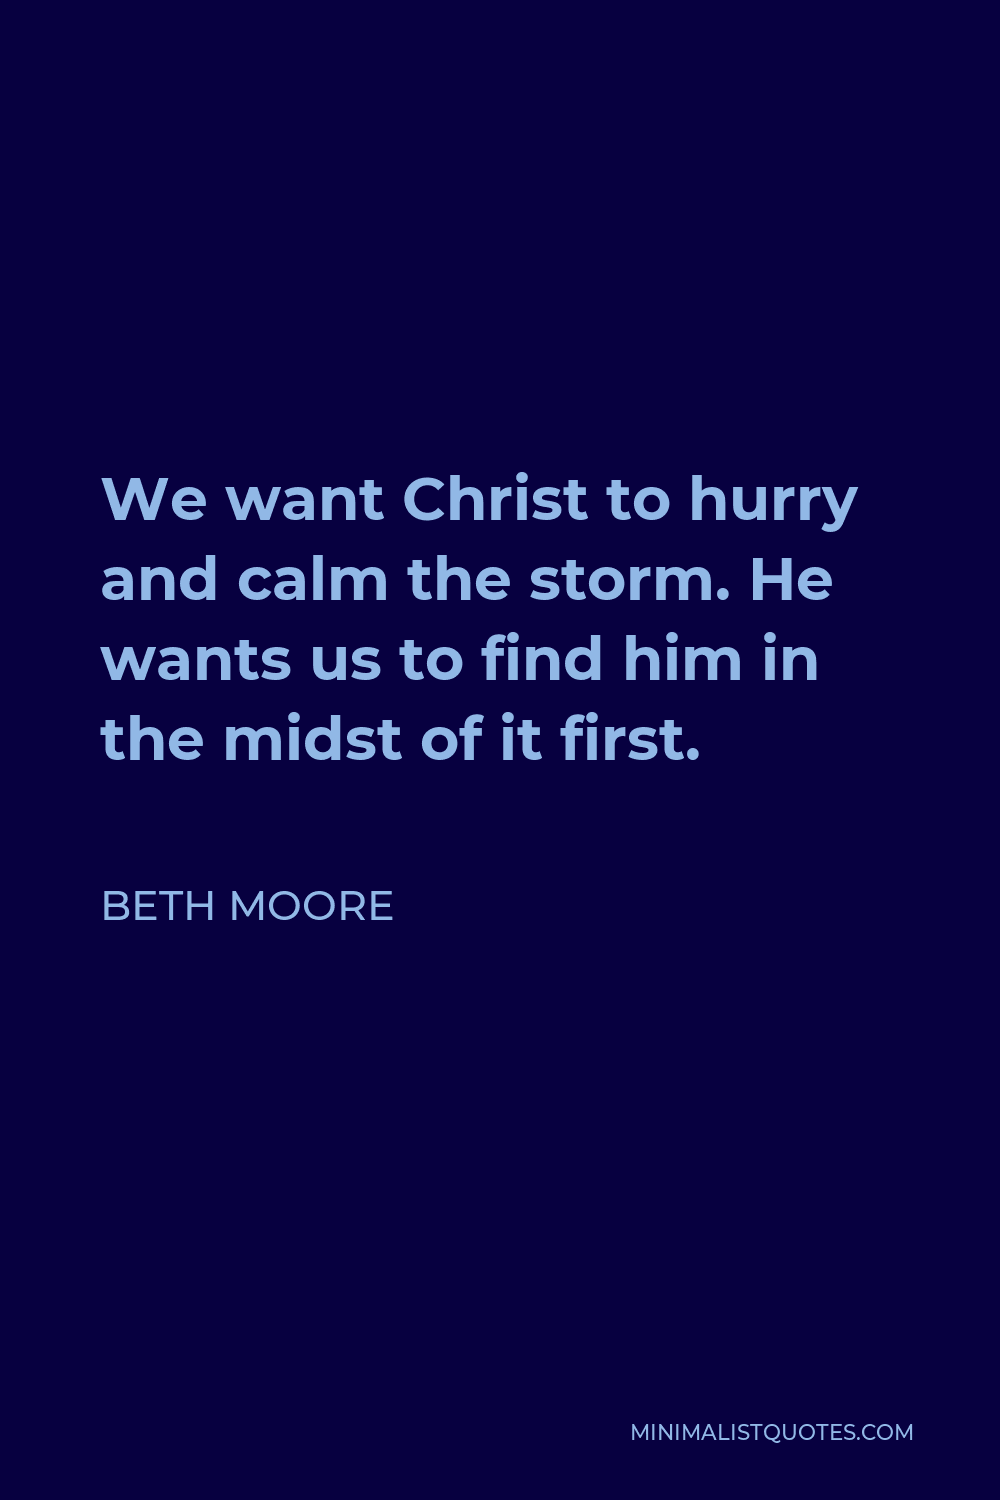 Beth Moore Quote - We want Christ to hurry and calm the storm. He wants us to find him in the midst of it first.